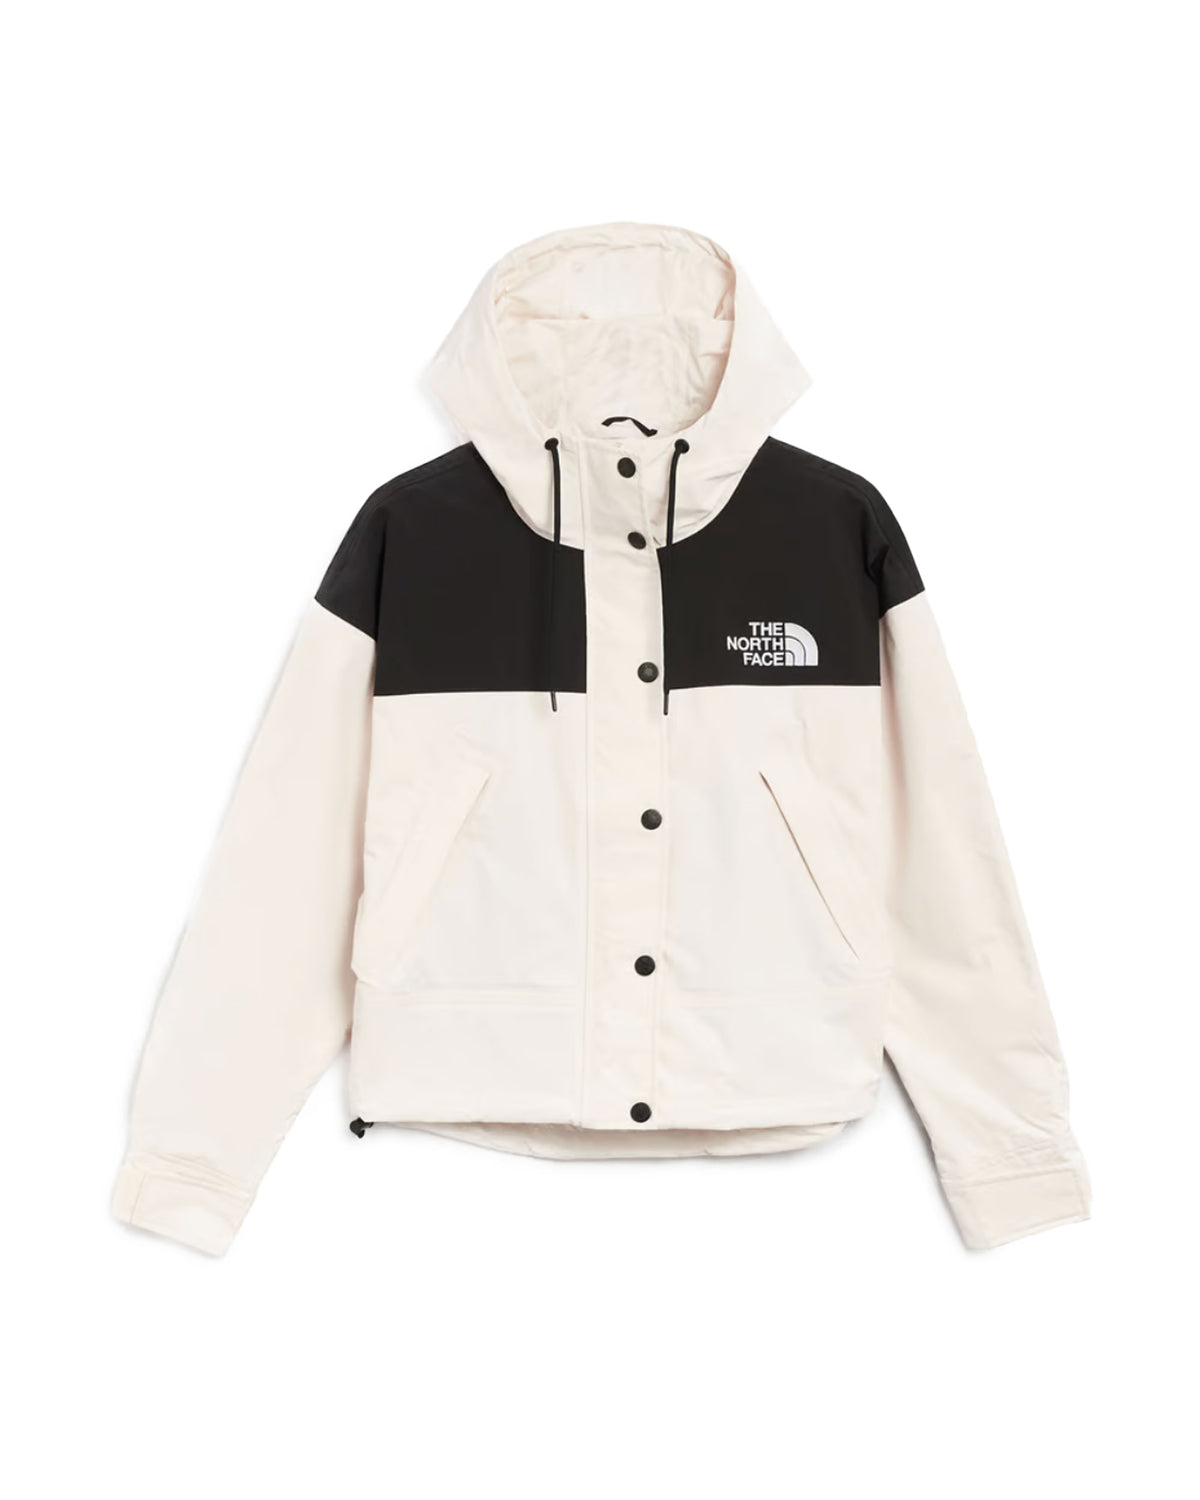 Giacca Donna The North Face Reign On Jacket Bianco